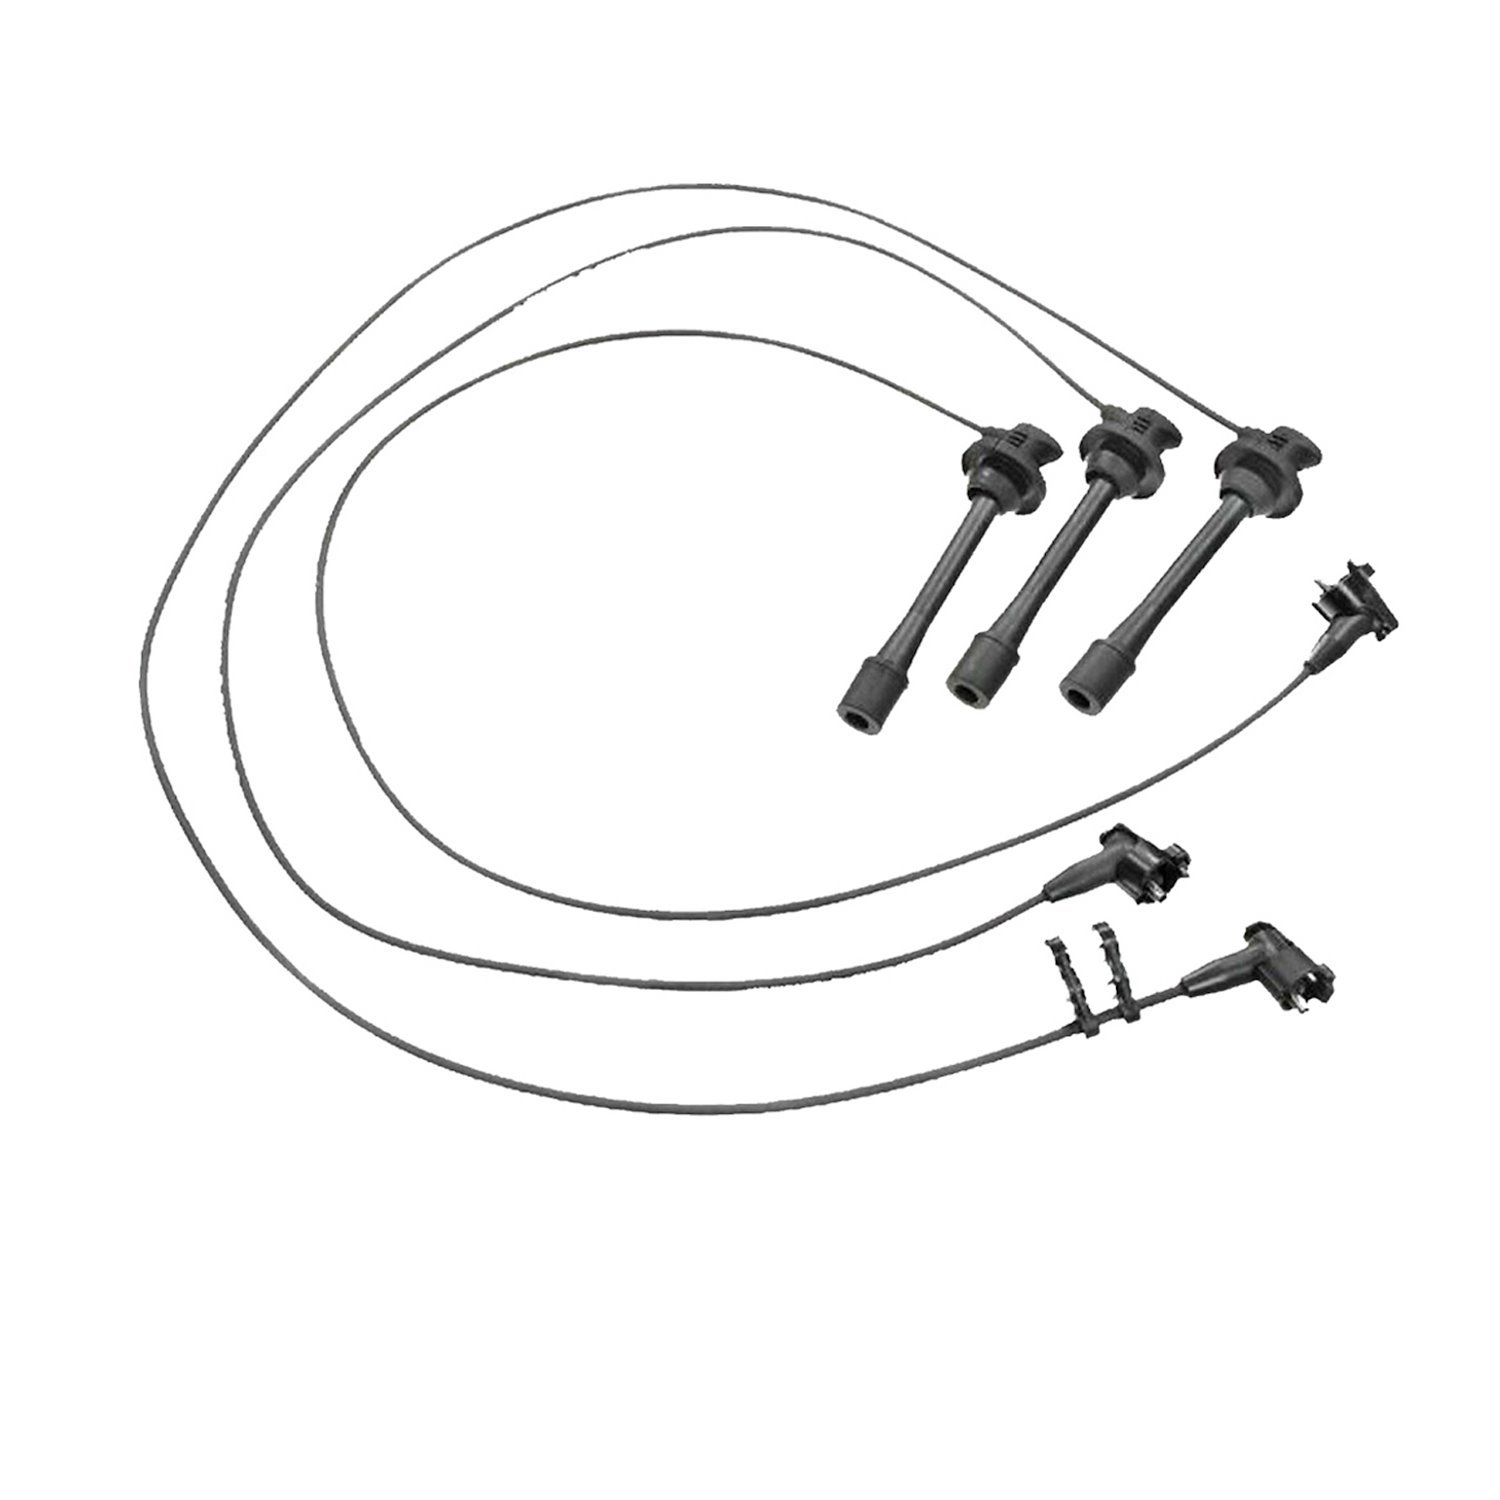 OE Replacement Spark Plug Wire Set for 1995-04 Toyota T100/Tacoma 3.4L, 2000-04 Toyota Tundra 3.4L, 1996-02 Toyota 4Runner 3.4L